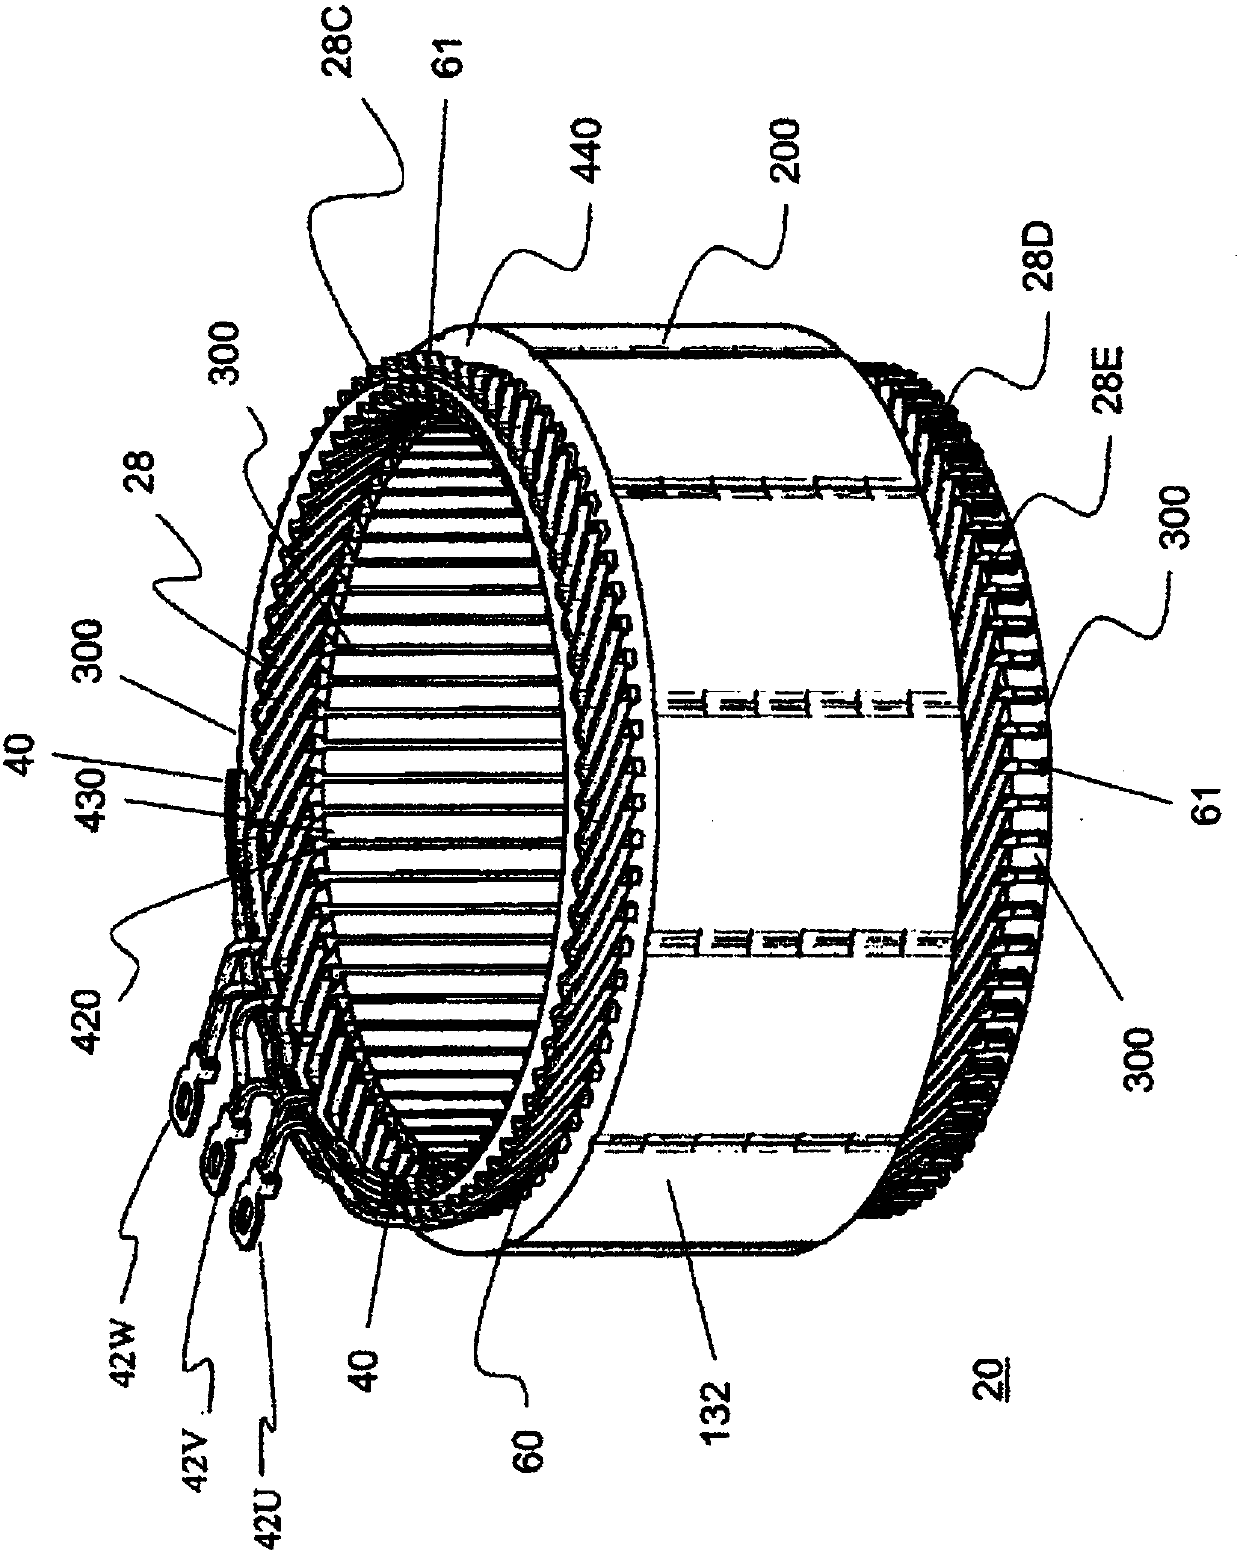 Rotor, rotating electrical machine provided therewith, and method of manufacturing rotor